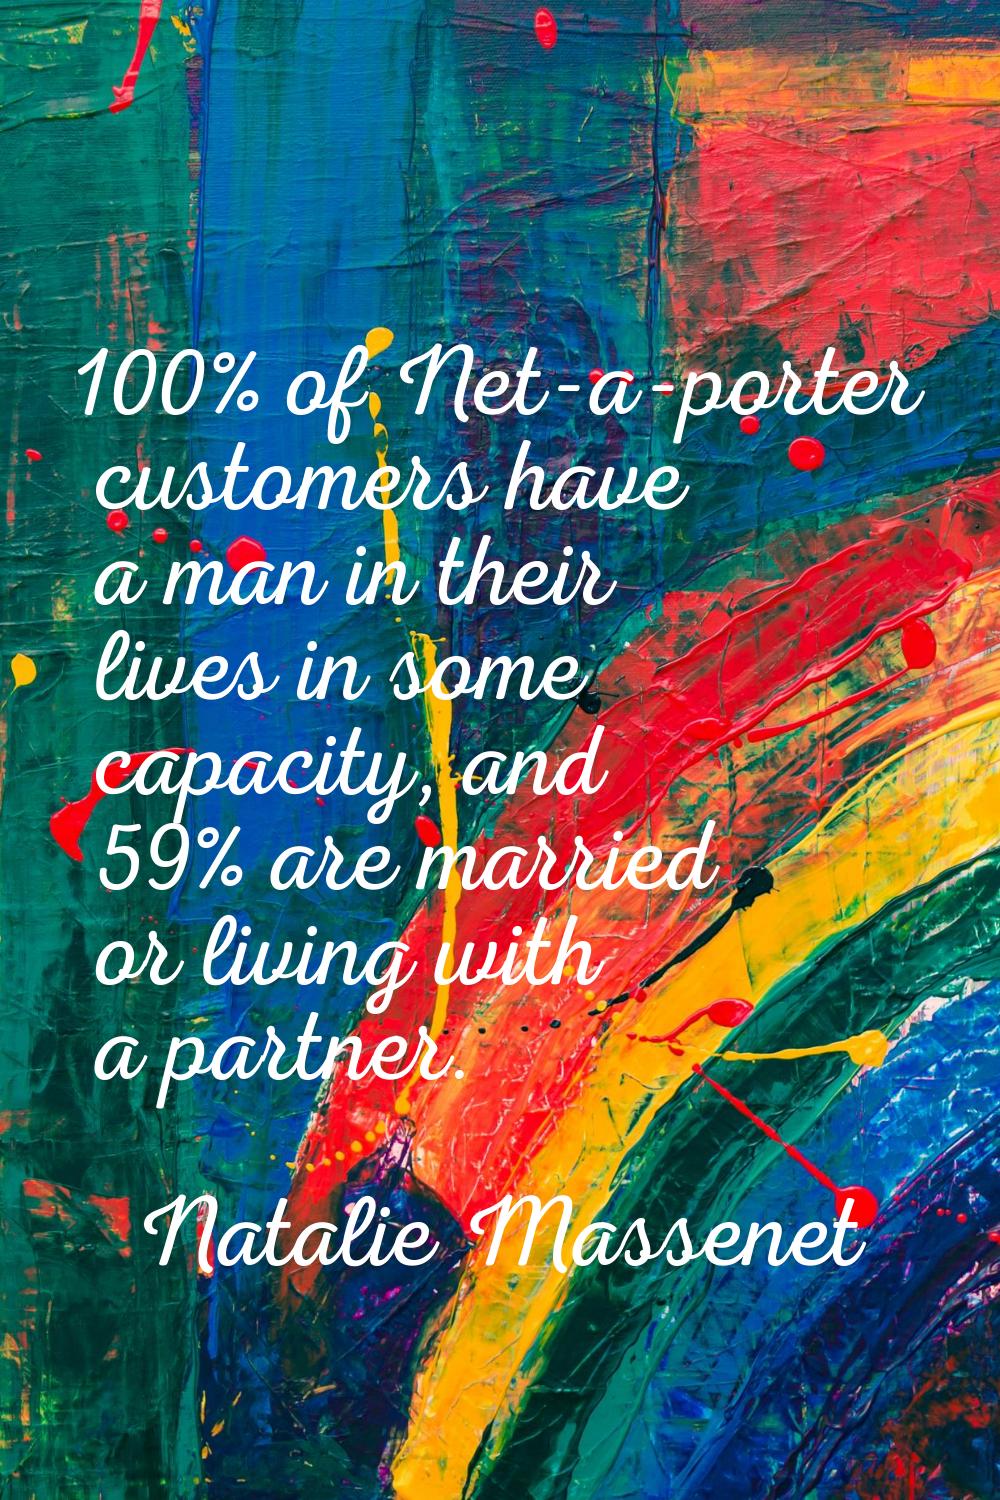 100% of Net-a-porter customers have a man in their lives in some capacity, and 59% are married or l